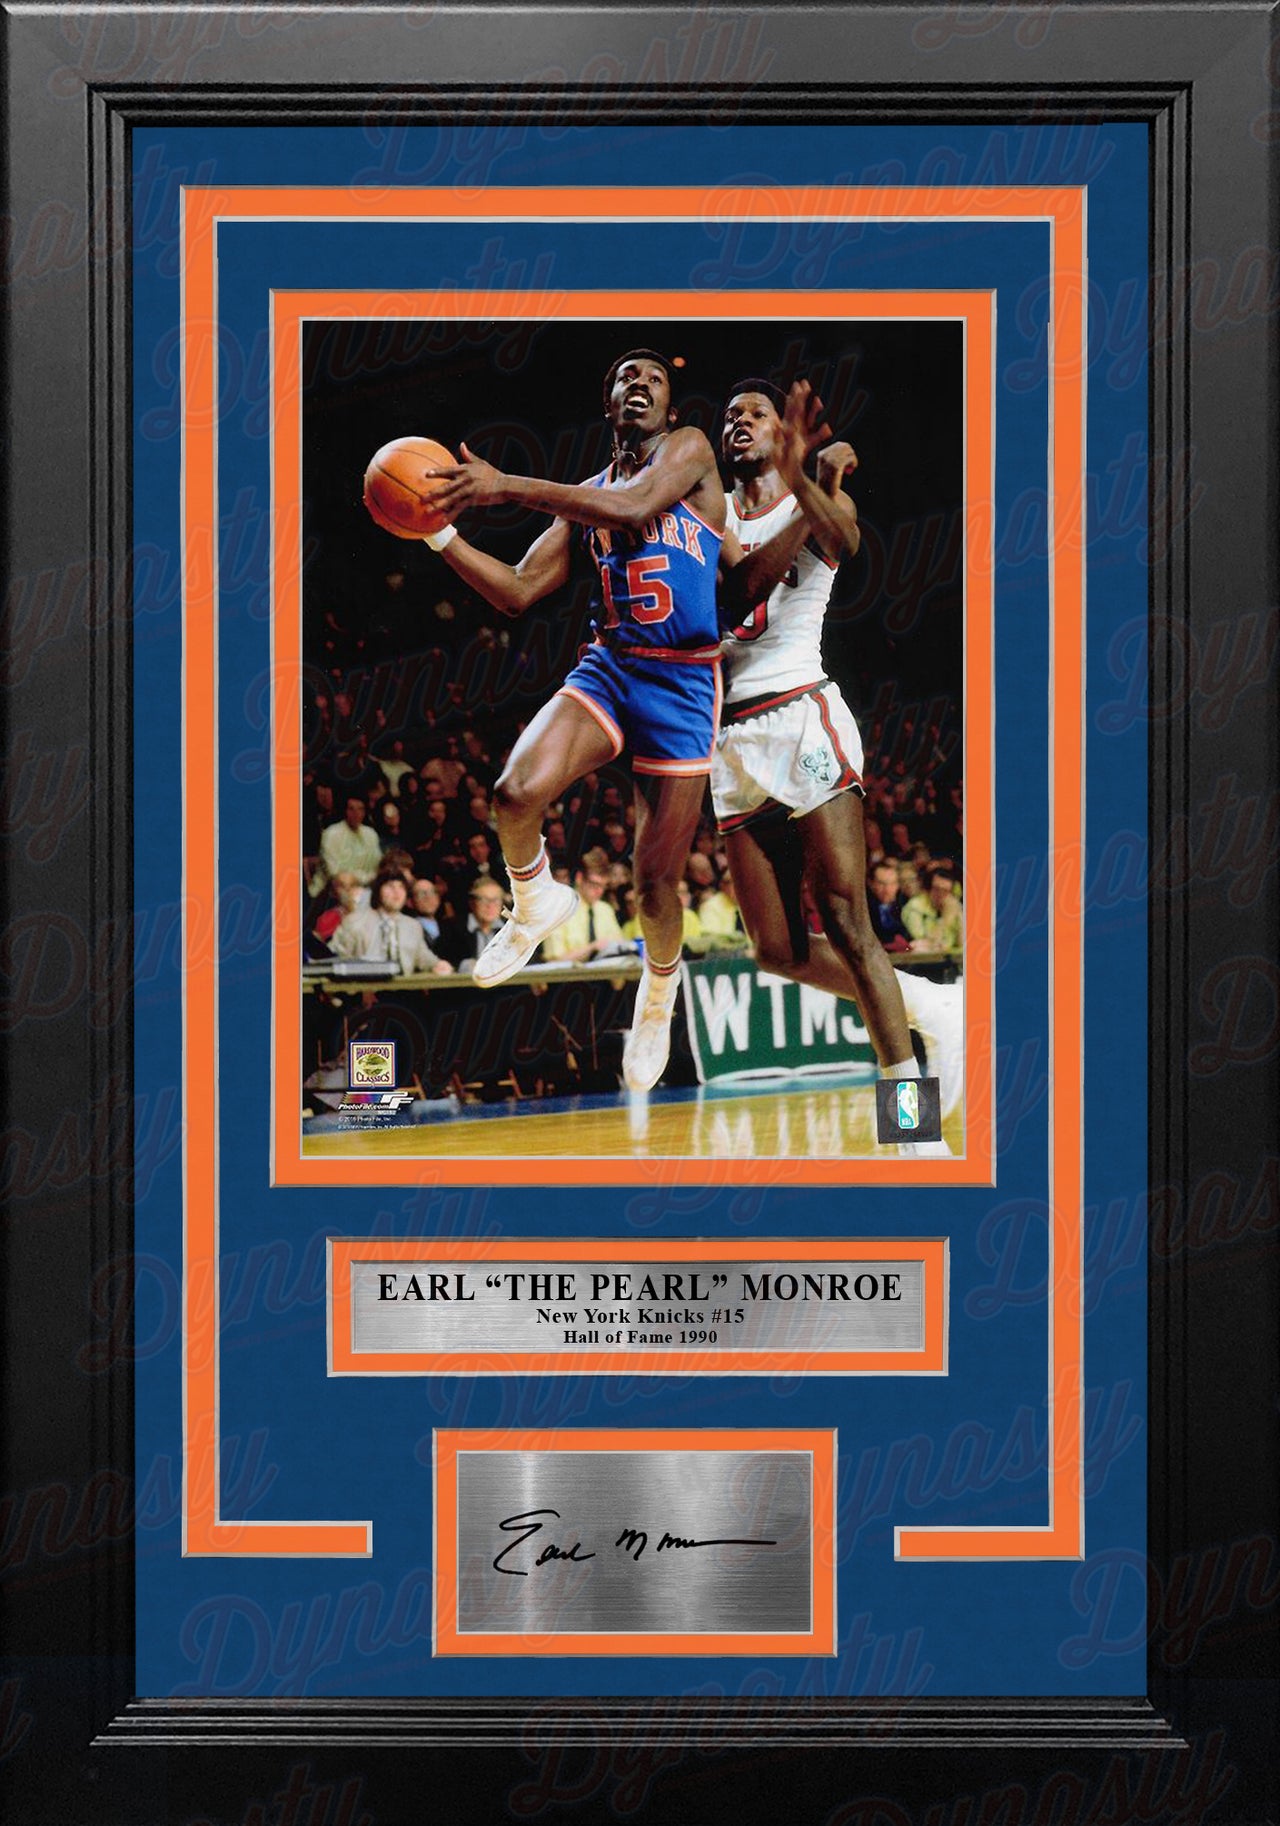 Earl Monroe in Action New York Knicks 8" x 10" Framed Basketball Photo with Engraved Autograph - Dynasty Sports & Framing 